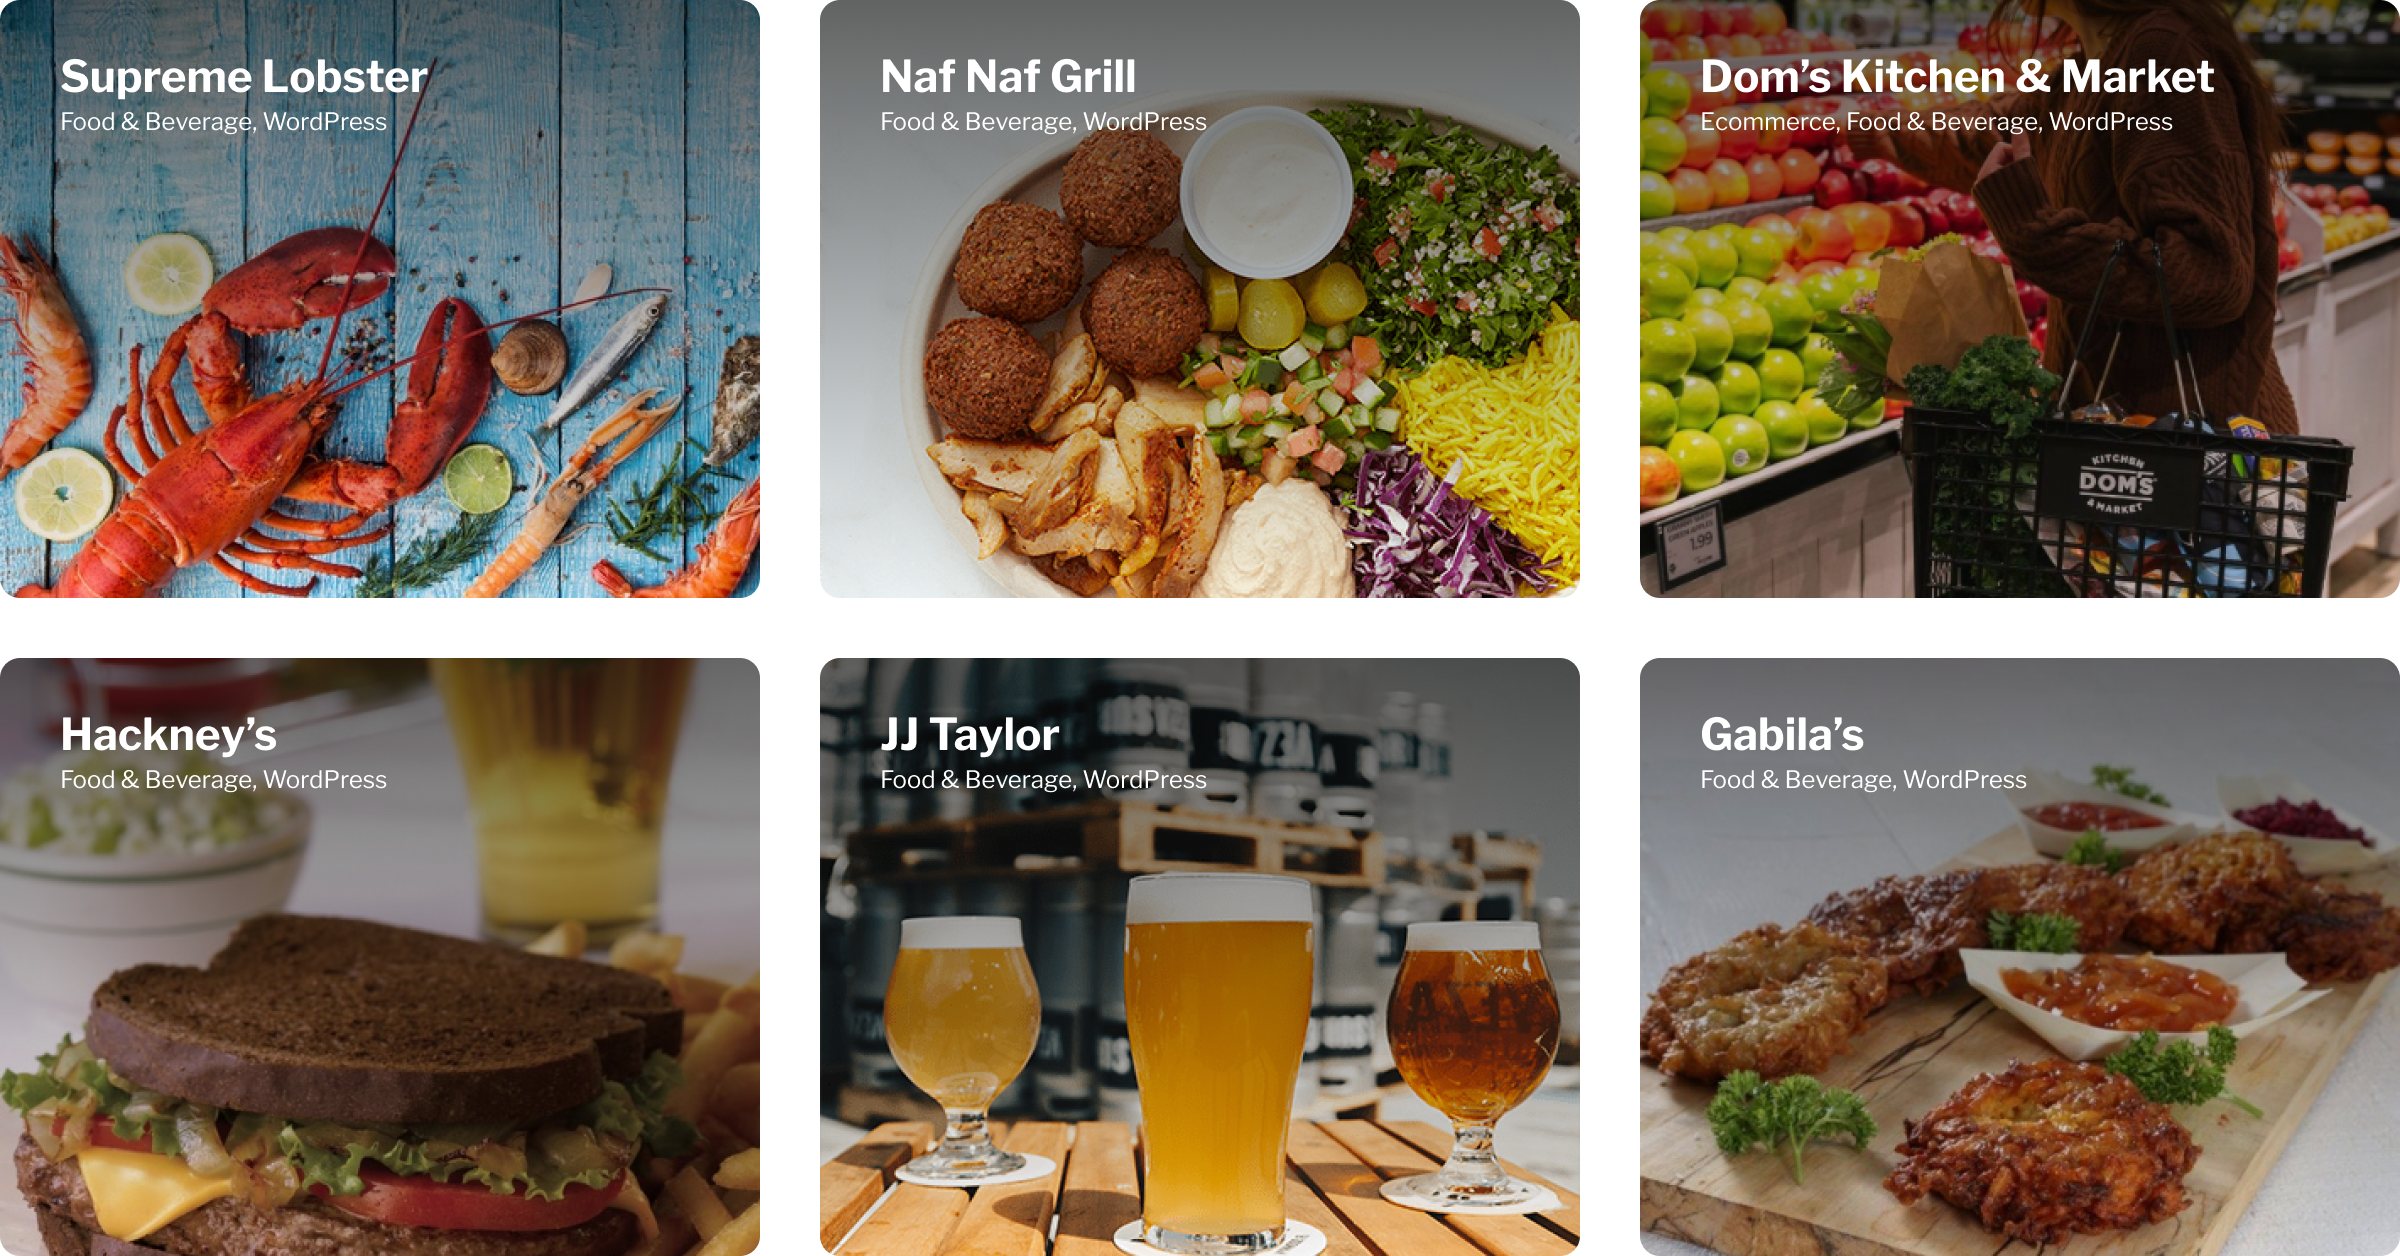 Collage of six food businesses: Supreme Lobster seafood spread, Naf Naf Grill's Middle Eastern feast, Dom's Kitchen market scene, Hackney's sandwich with fries, JJ Taylor's craft beers, and Gabila's latkes